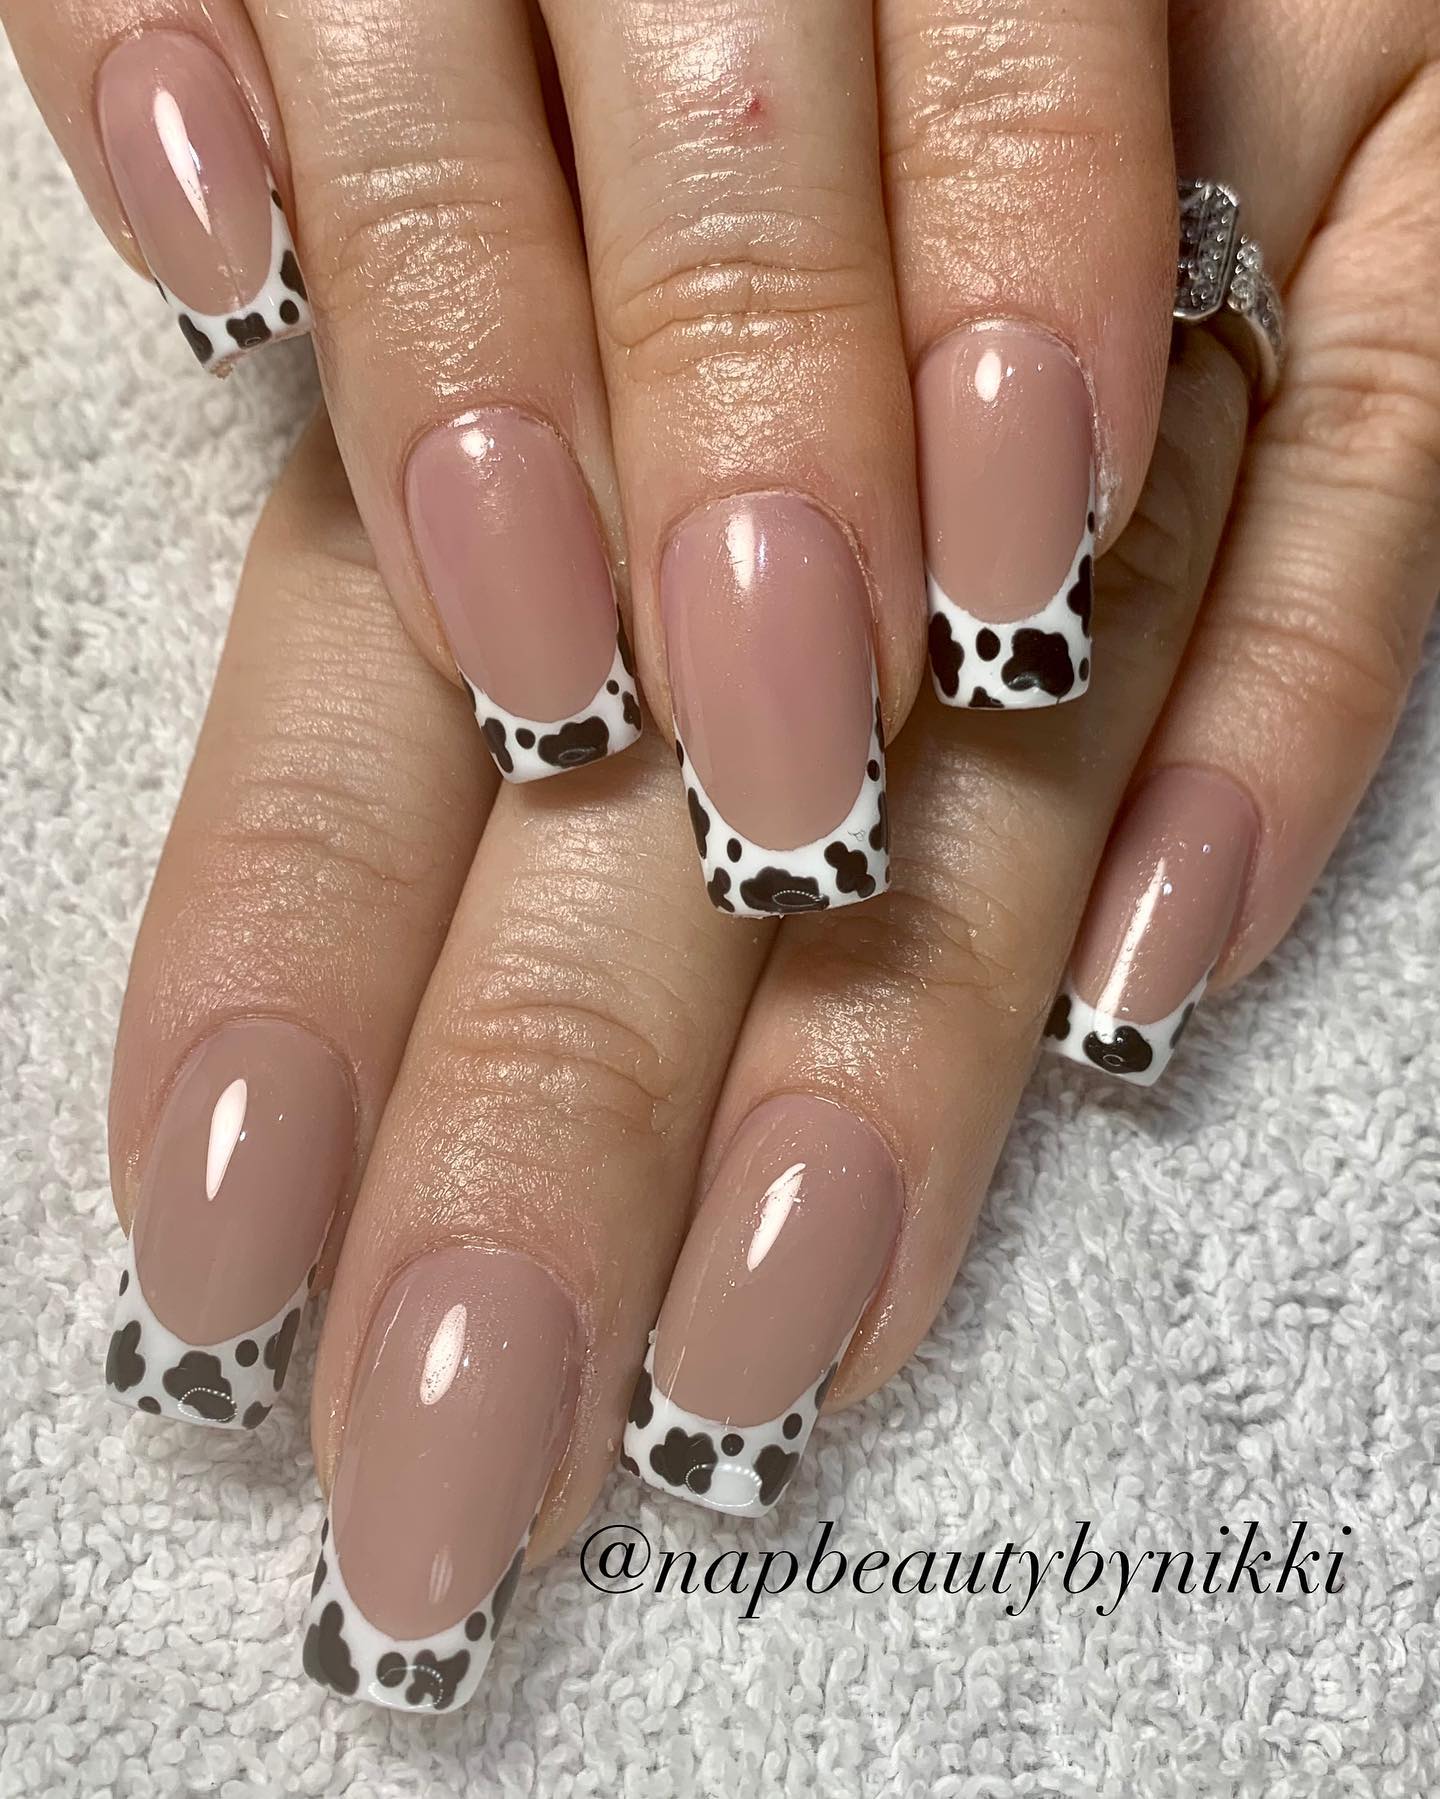 Are you ready for a cow-themed party? Your long square nails with be quite matching with cow print French tips like the one above. Darker tone of nude nail polish will add an extra beauty, too.